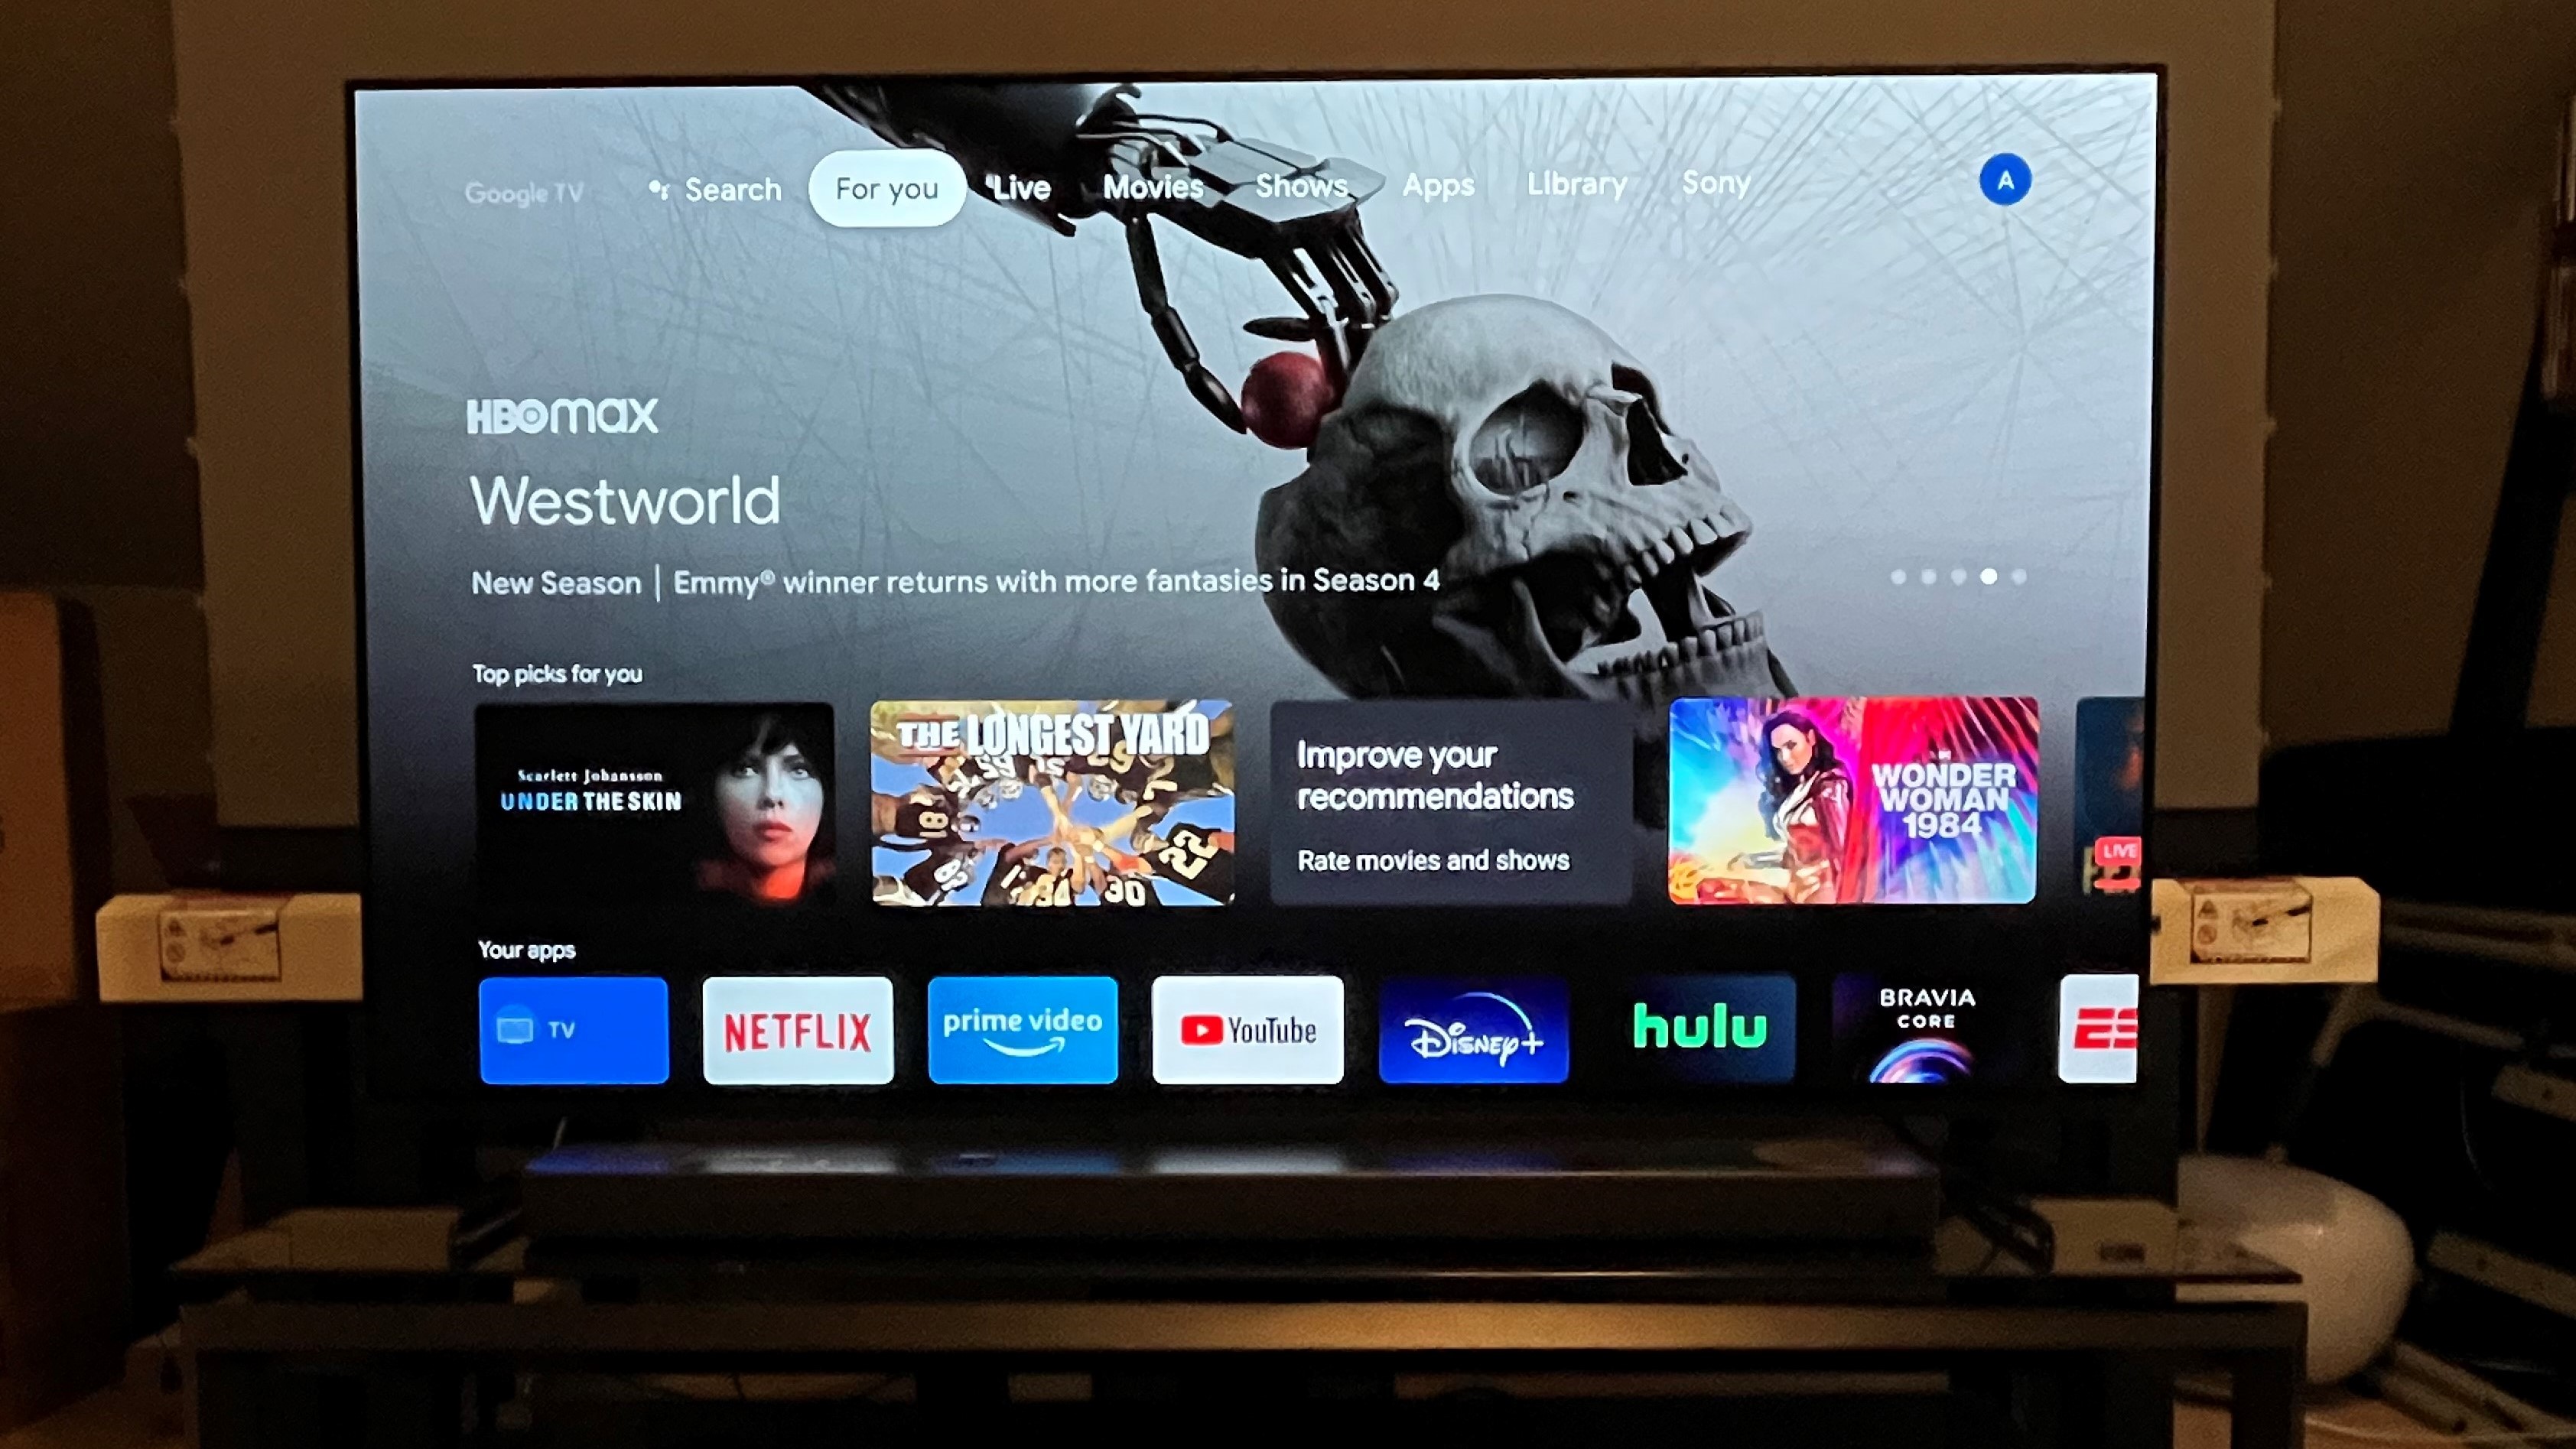 The Sony A80K series OLED displaying the Google TV interface